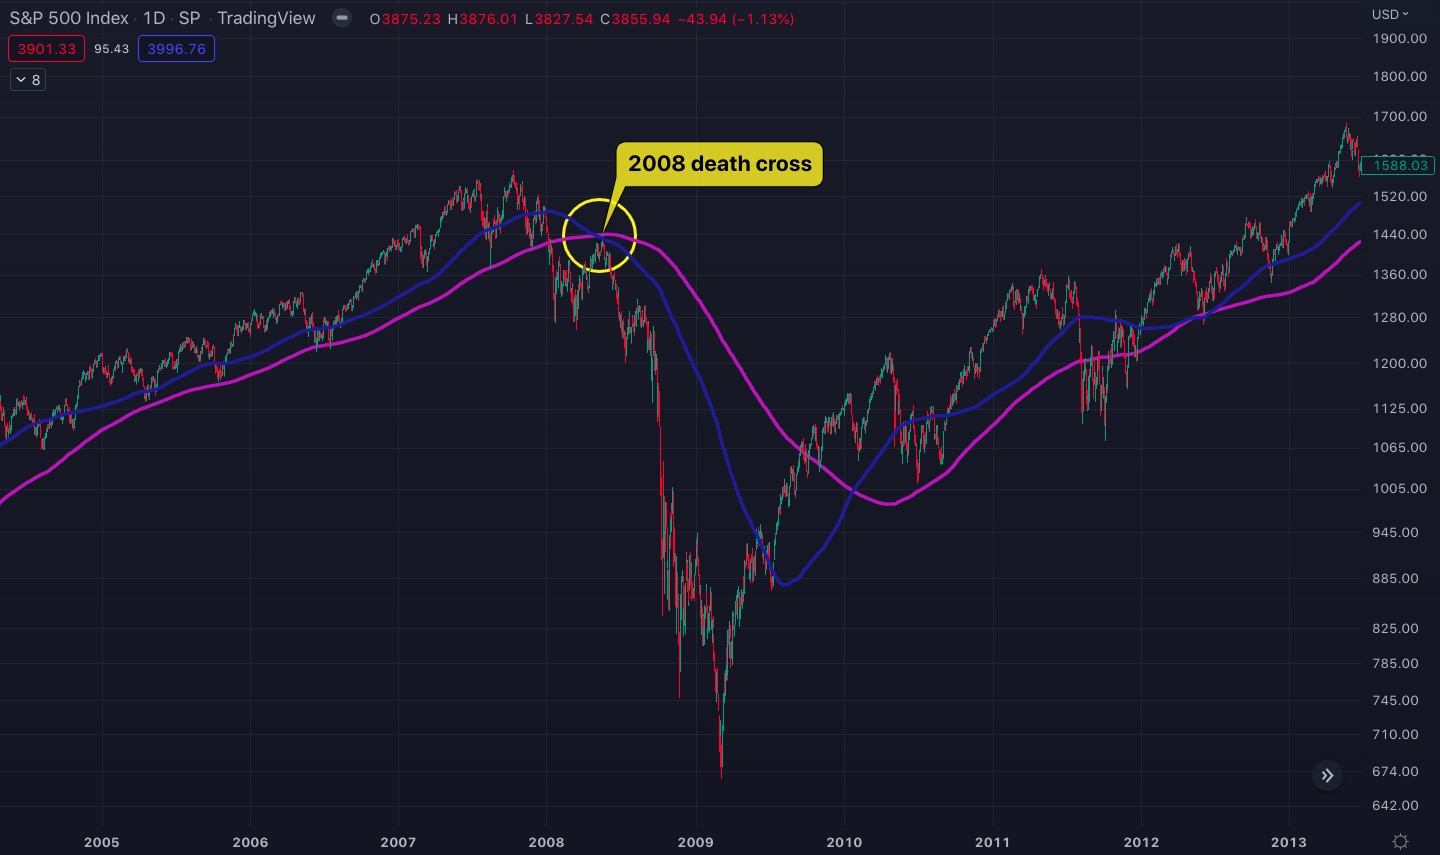 The same death cross in May 2008 followed by a 50% price crash